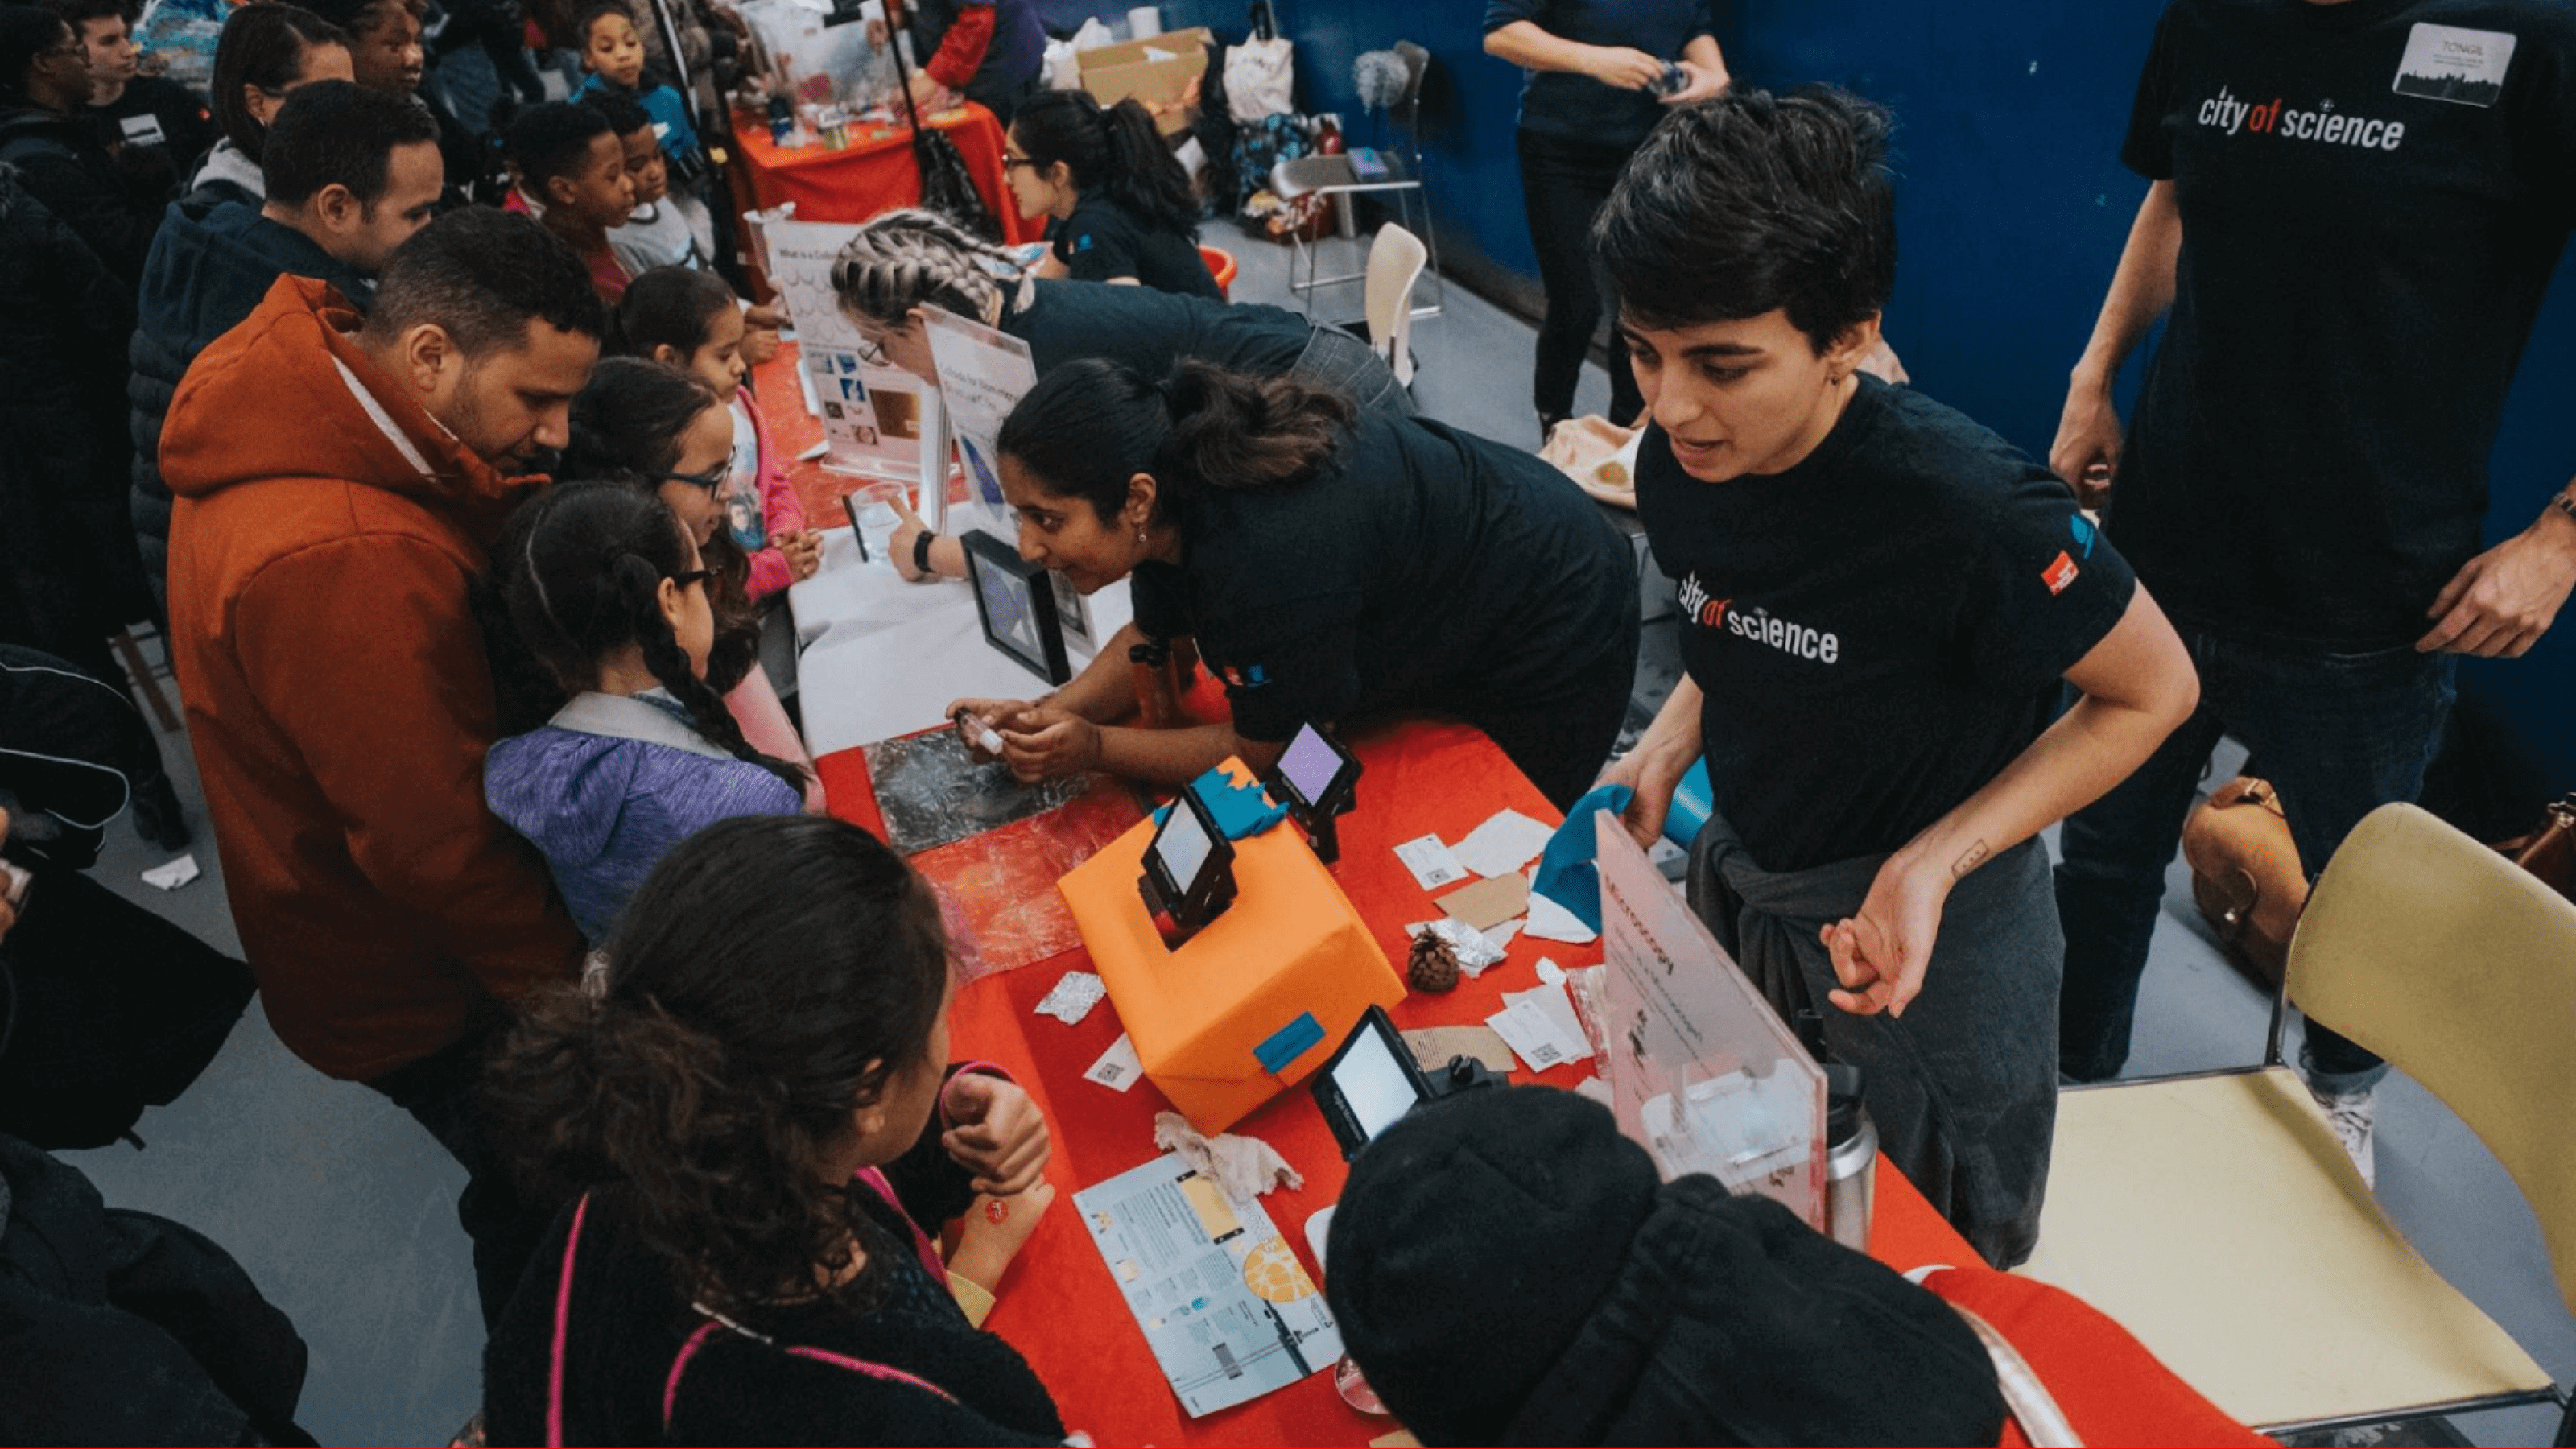 City of science Bronx event